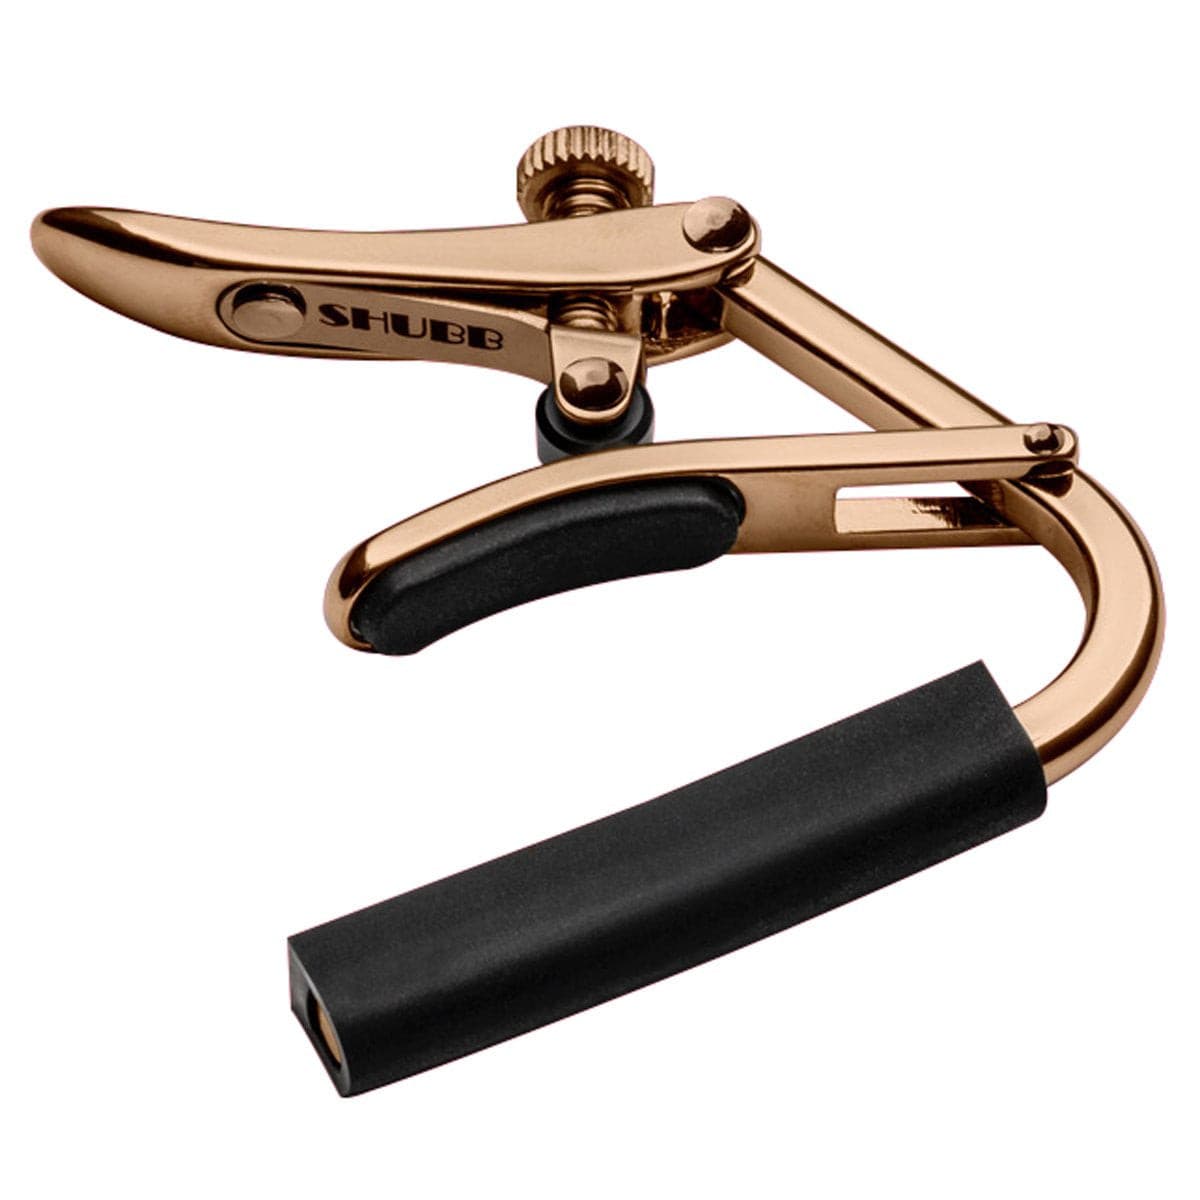 Shubb 'Capo Royale' Banjo Capo - Rose Gold, Accessory for sale at Richards Guitars.